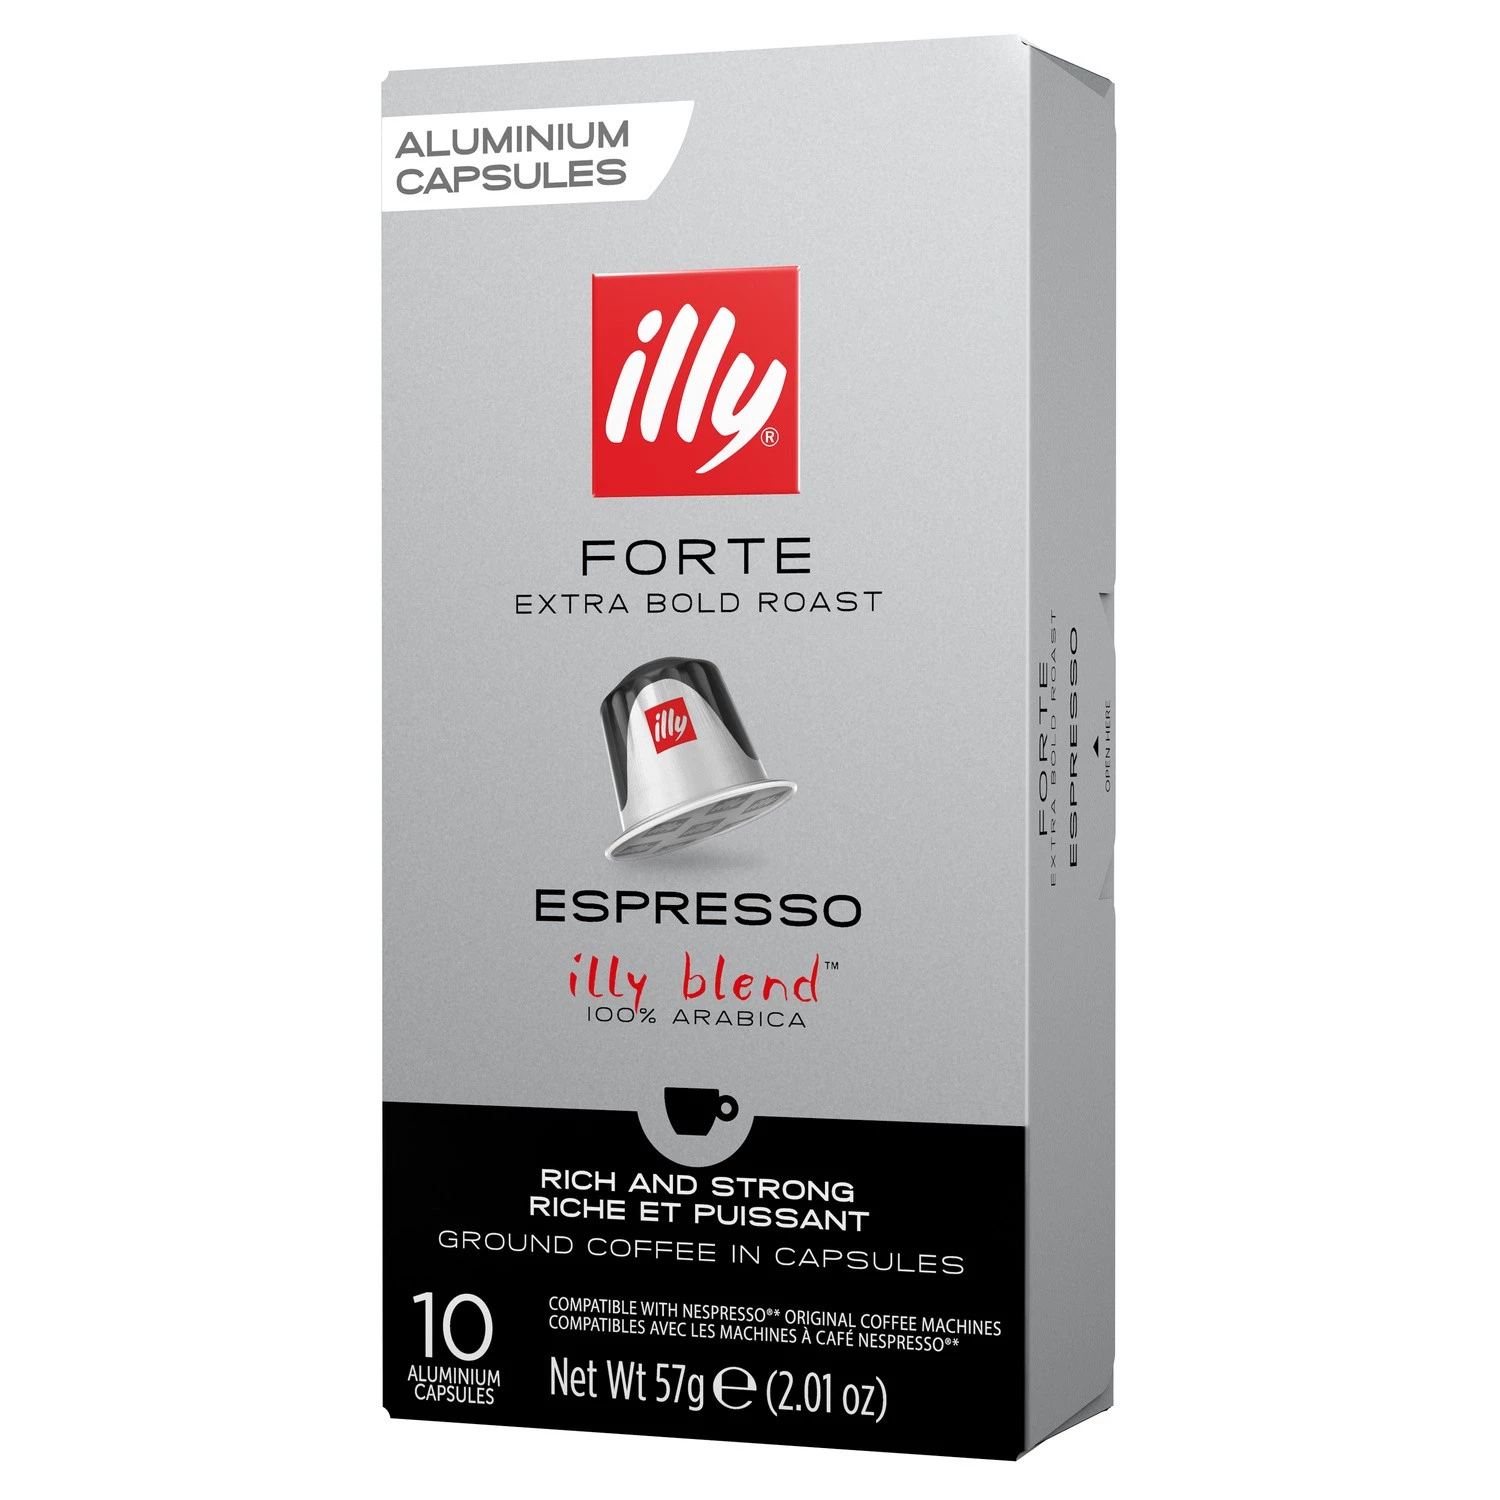 Strong coffee x10 espresso capsules57g - ILLY